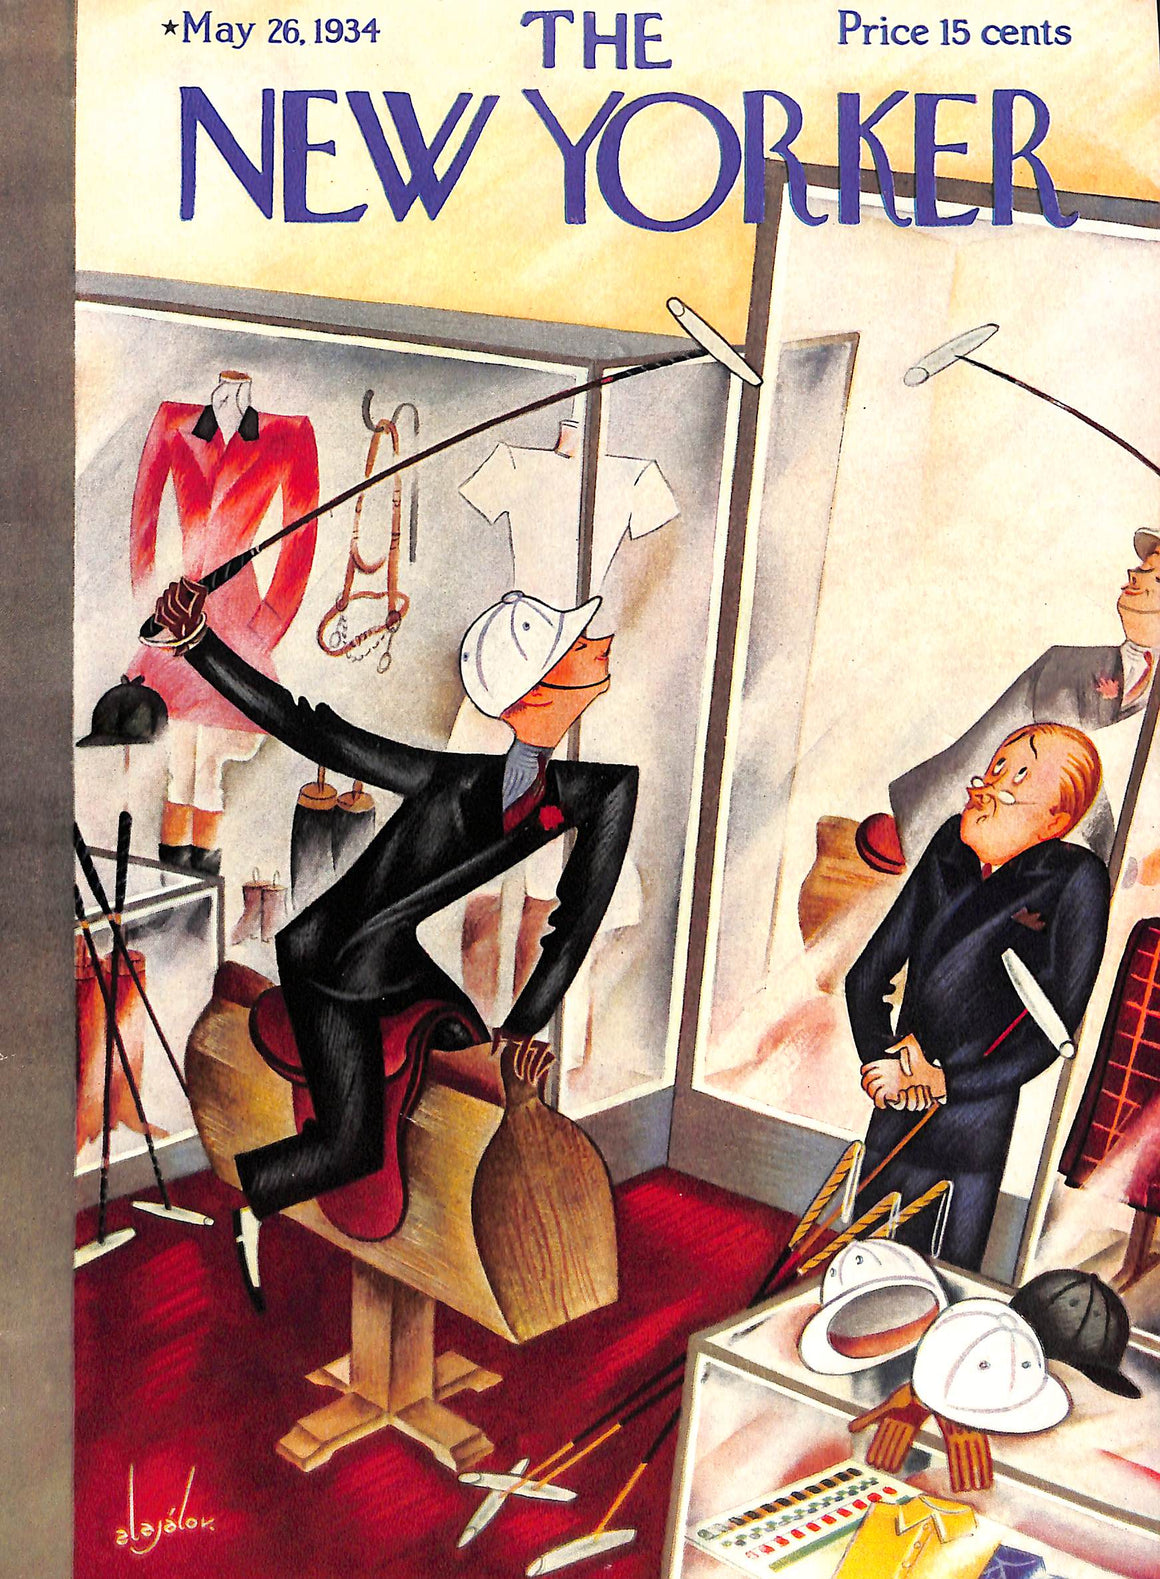 The New Yorker May 26, 1934 w/ 'Alajalov' Cover (SOLD)